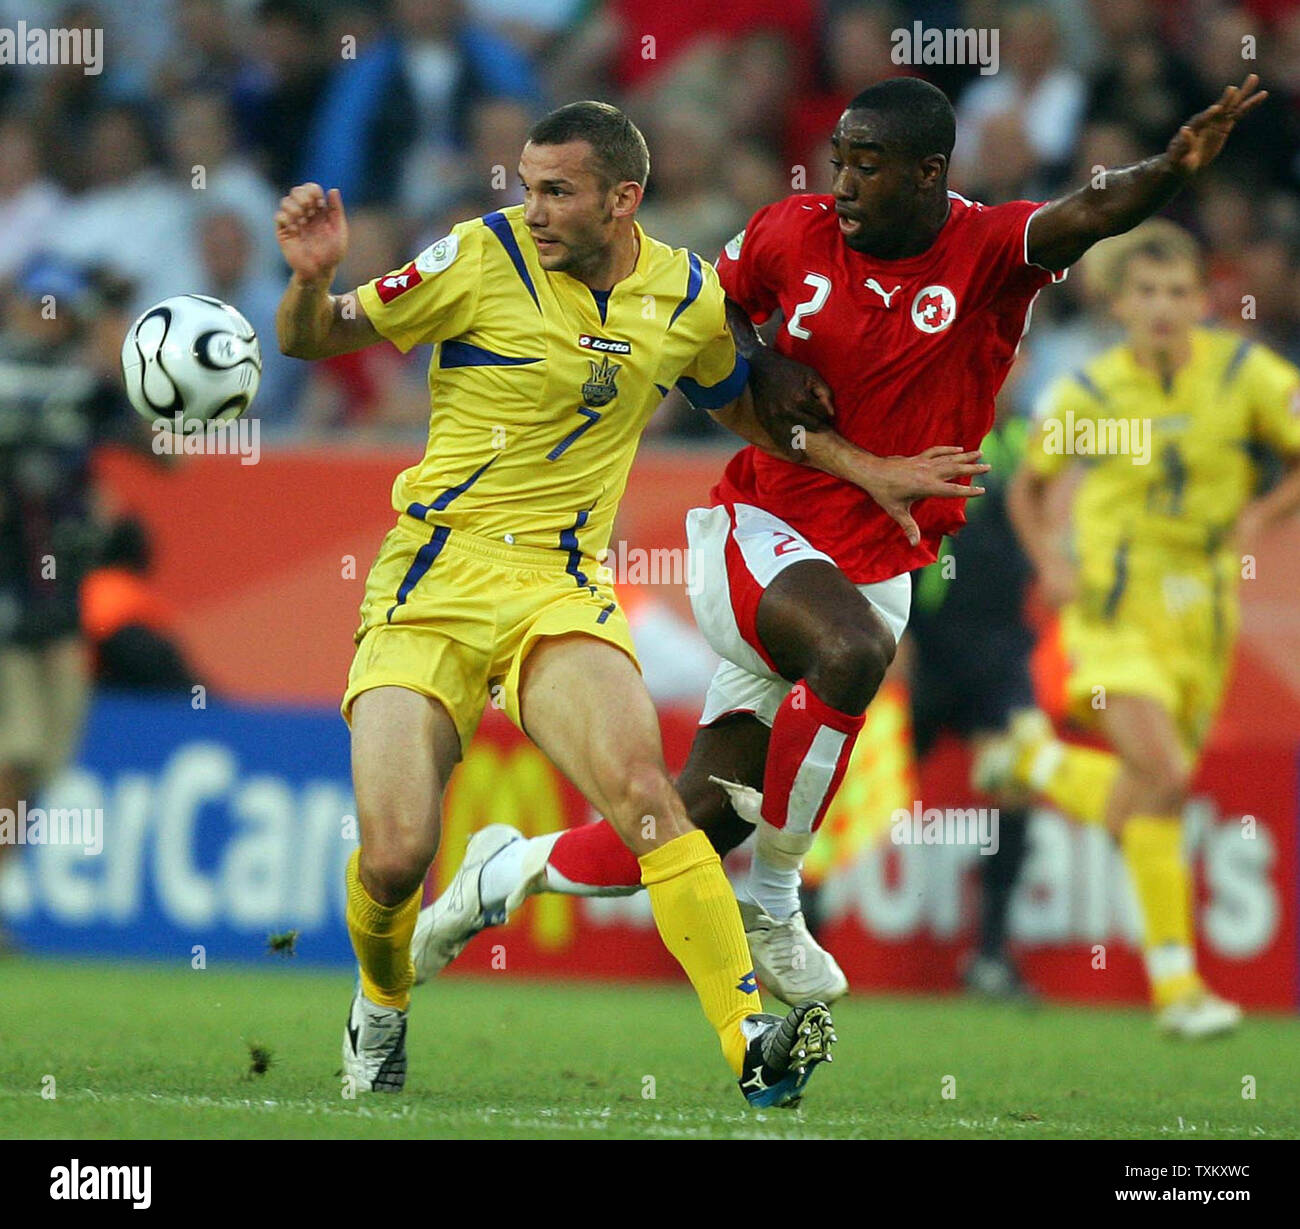 Switzerland's Johan Djourou (2) and Ukraine's Andriy Shevchenko (7) fight for the ball during FIFA World Cup 2006 soccer in Cologne, Germany on June 26, 2006. Ukraine eliminated Switzerland from the competition with a 3-0 win.  (UPI Photo/Christian Brunskill) Stock Photo